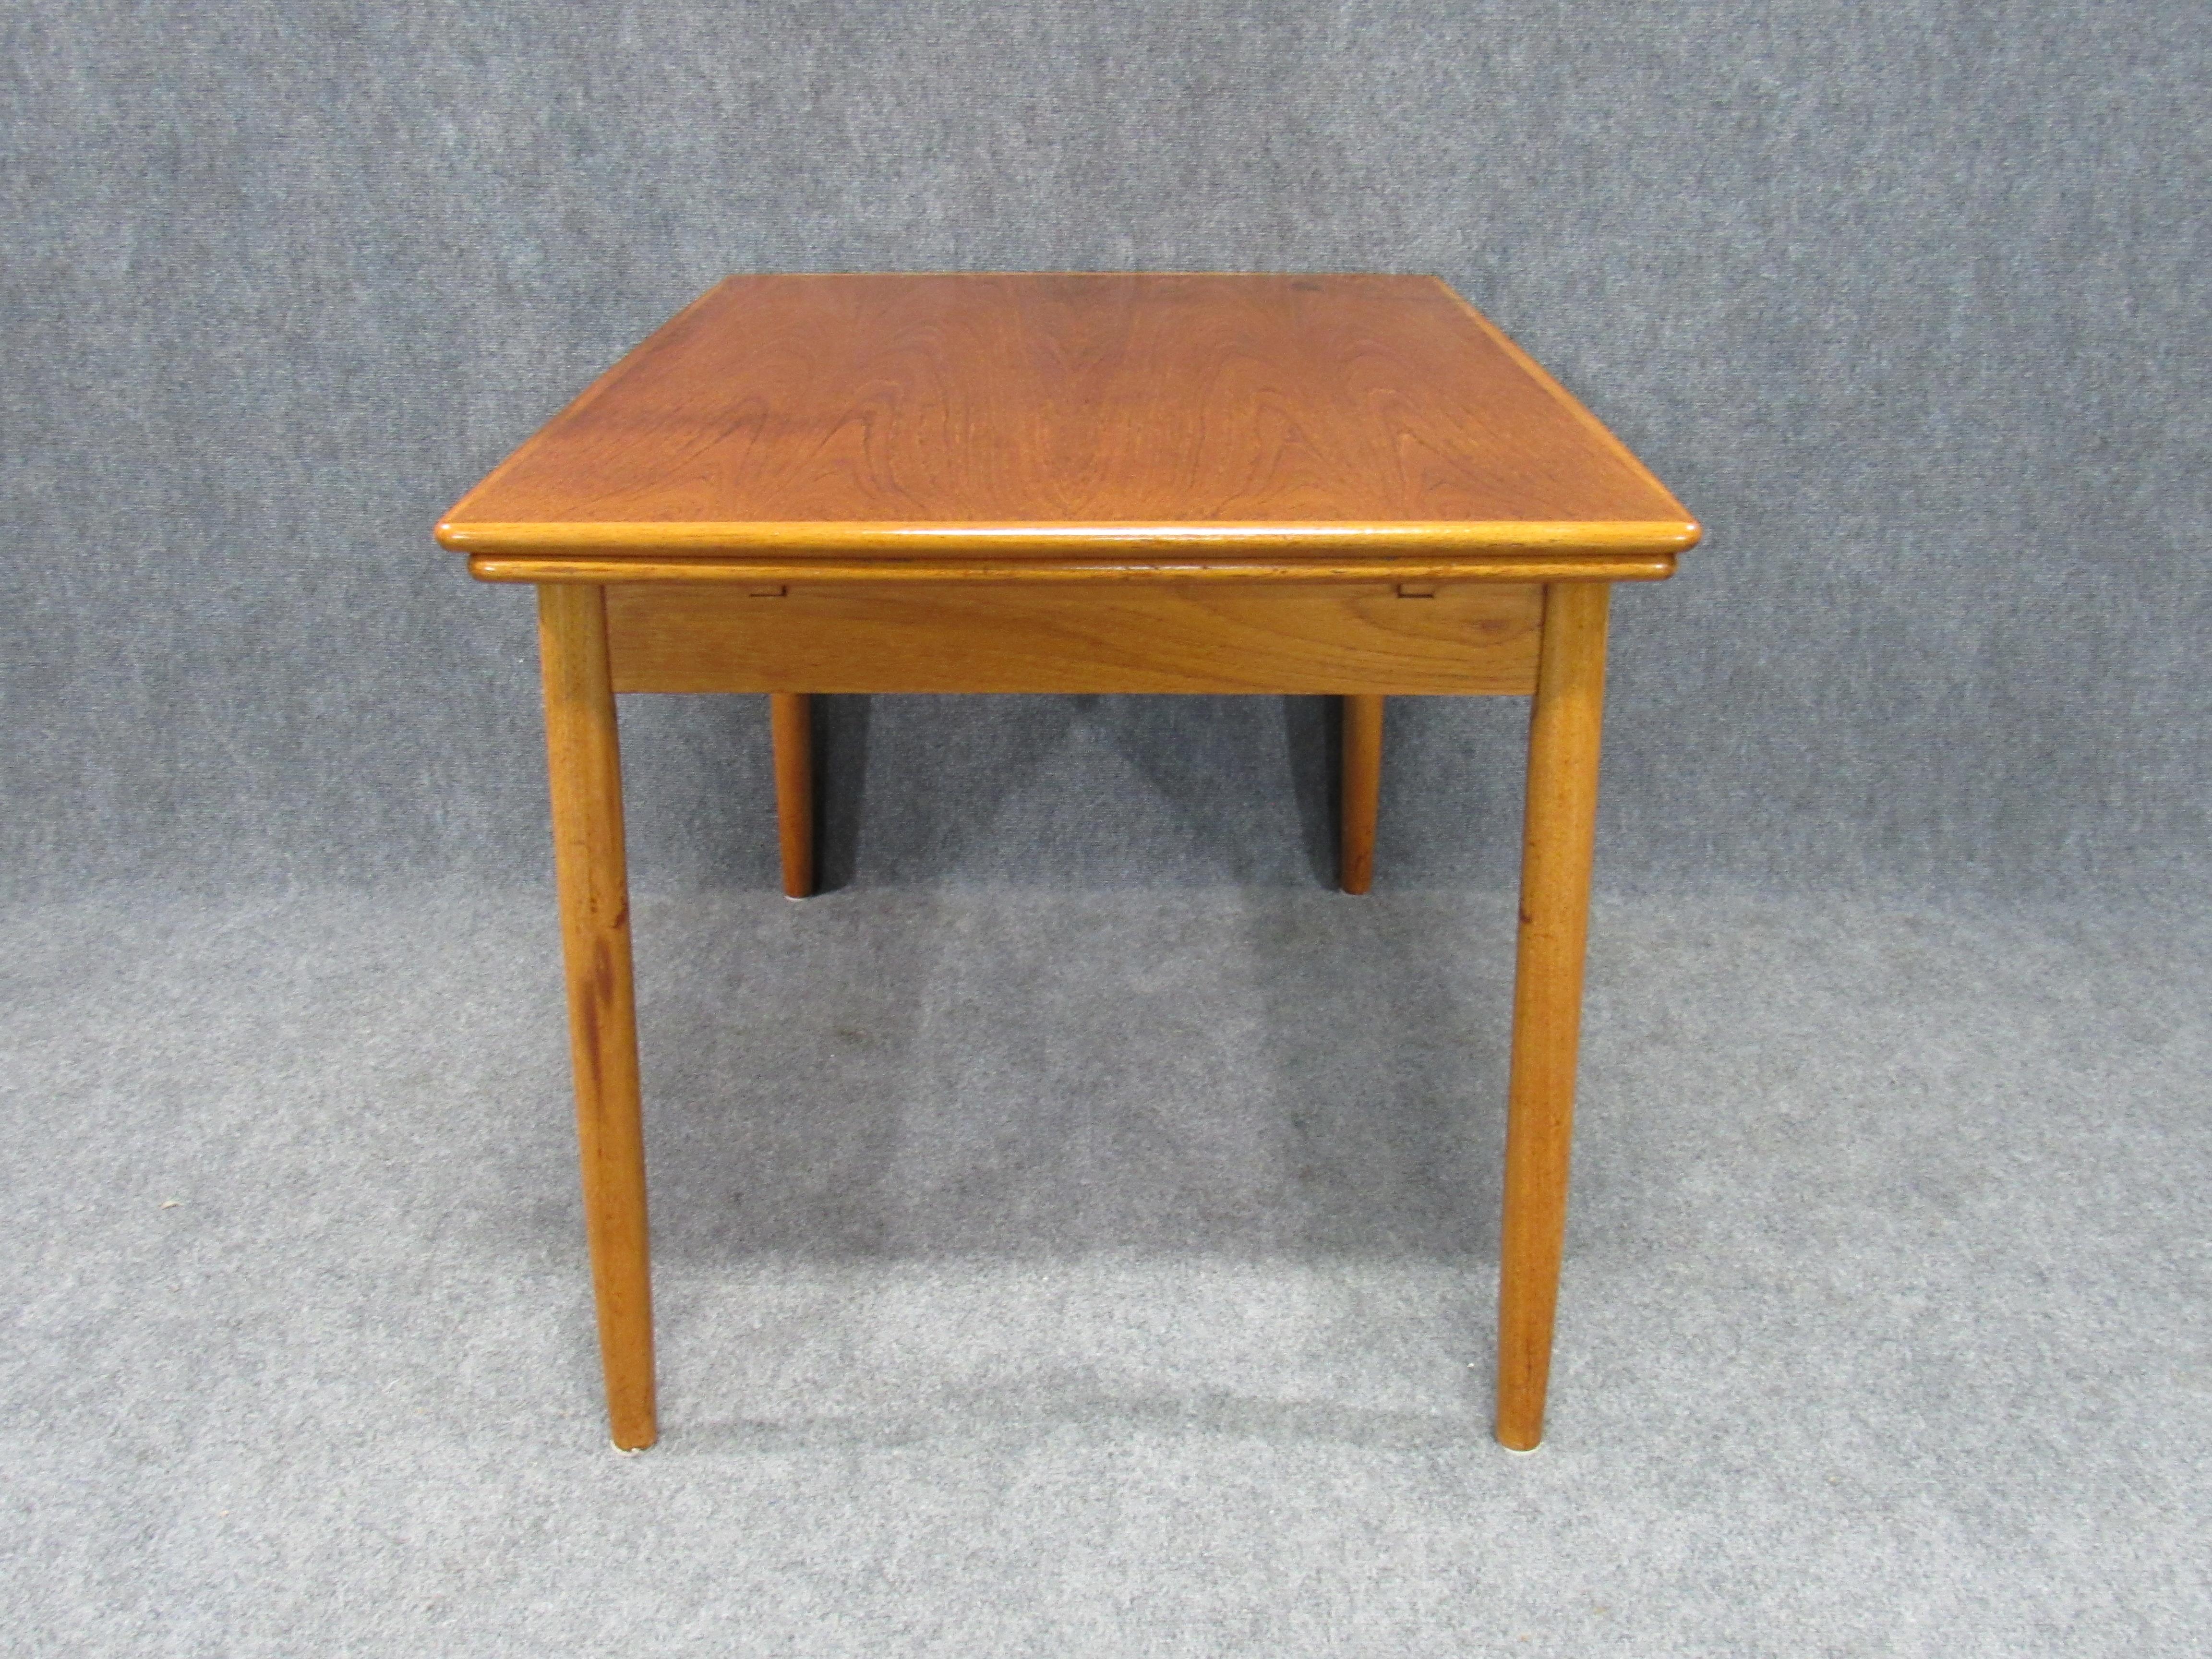 Mid-20th Century Midcentury Danish Modern Teak Dining Table with Two Pull-Out Leaves